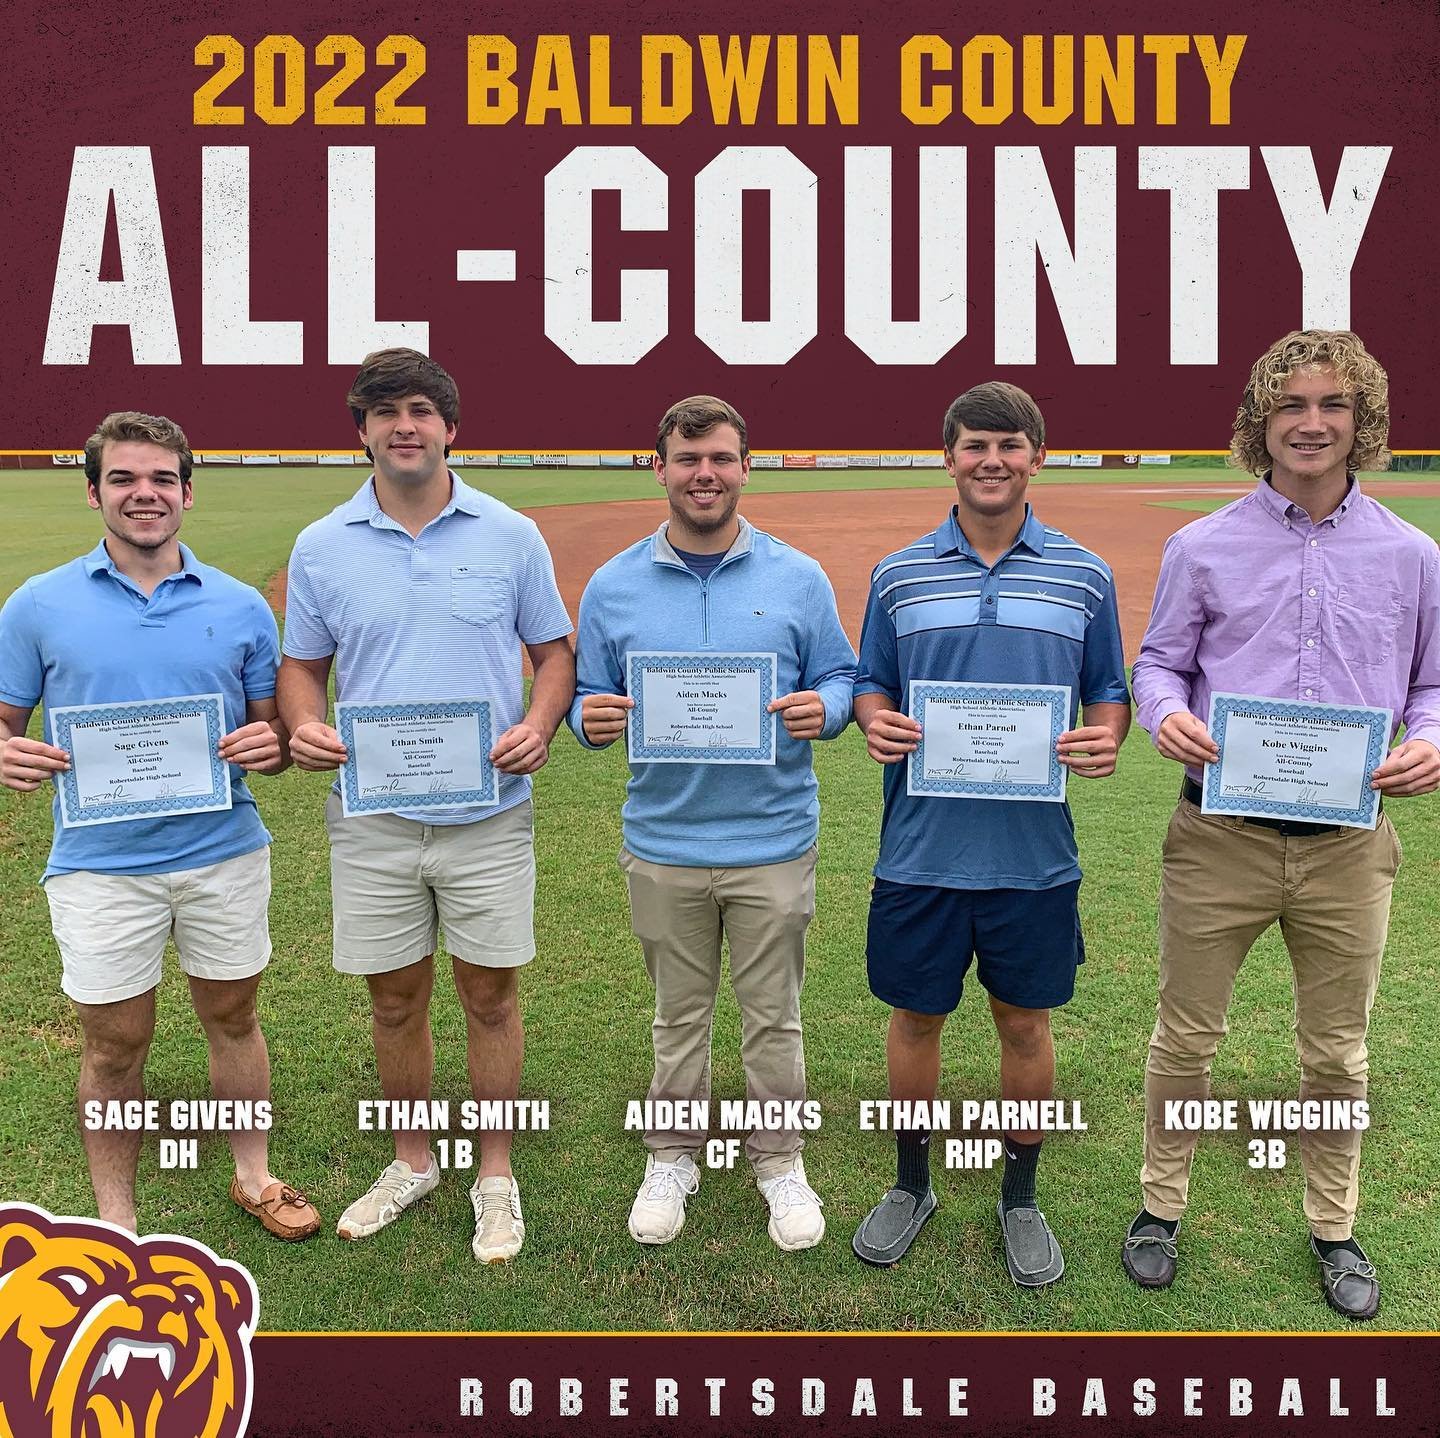 Robertsdale had five Golden Bear baseball players named to the All-Baldwin County team, including Sage Givens, Ethan Smith, Aiden Macks, Ethan Parnell and Kobe Wiggins.